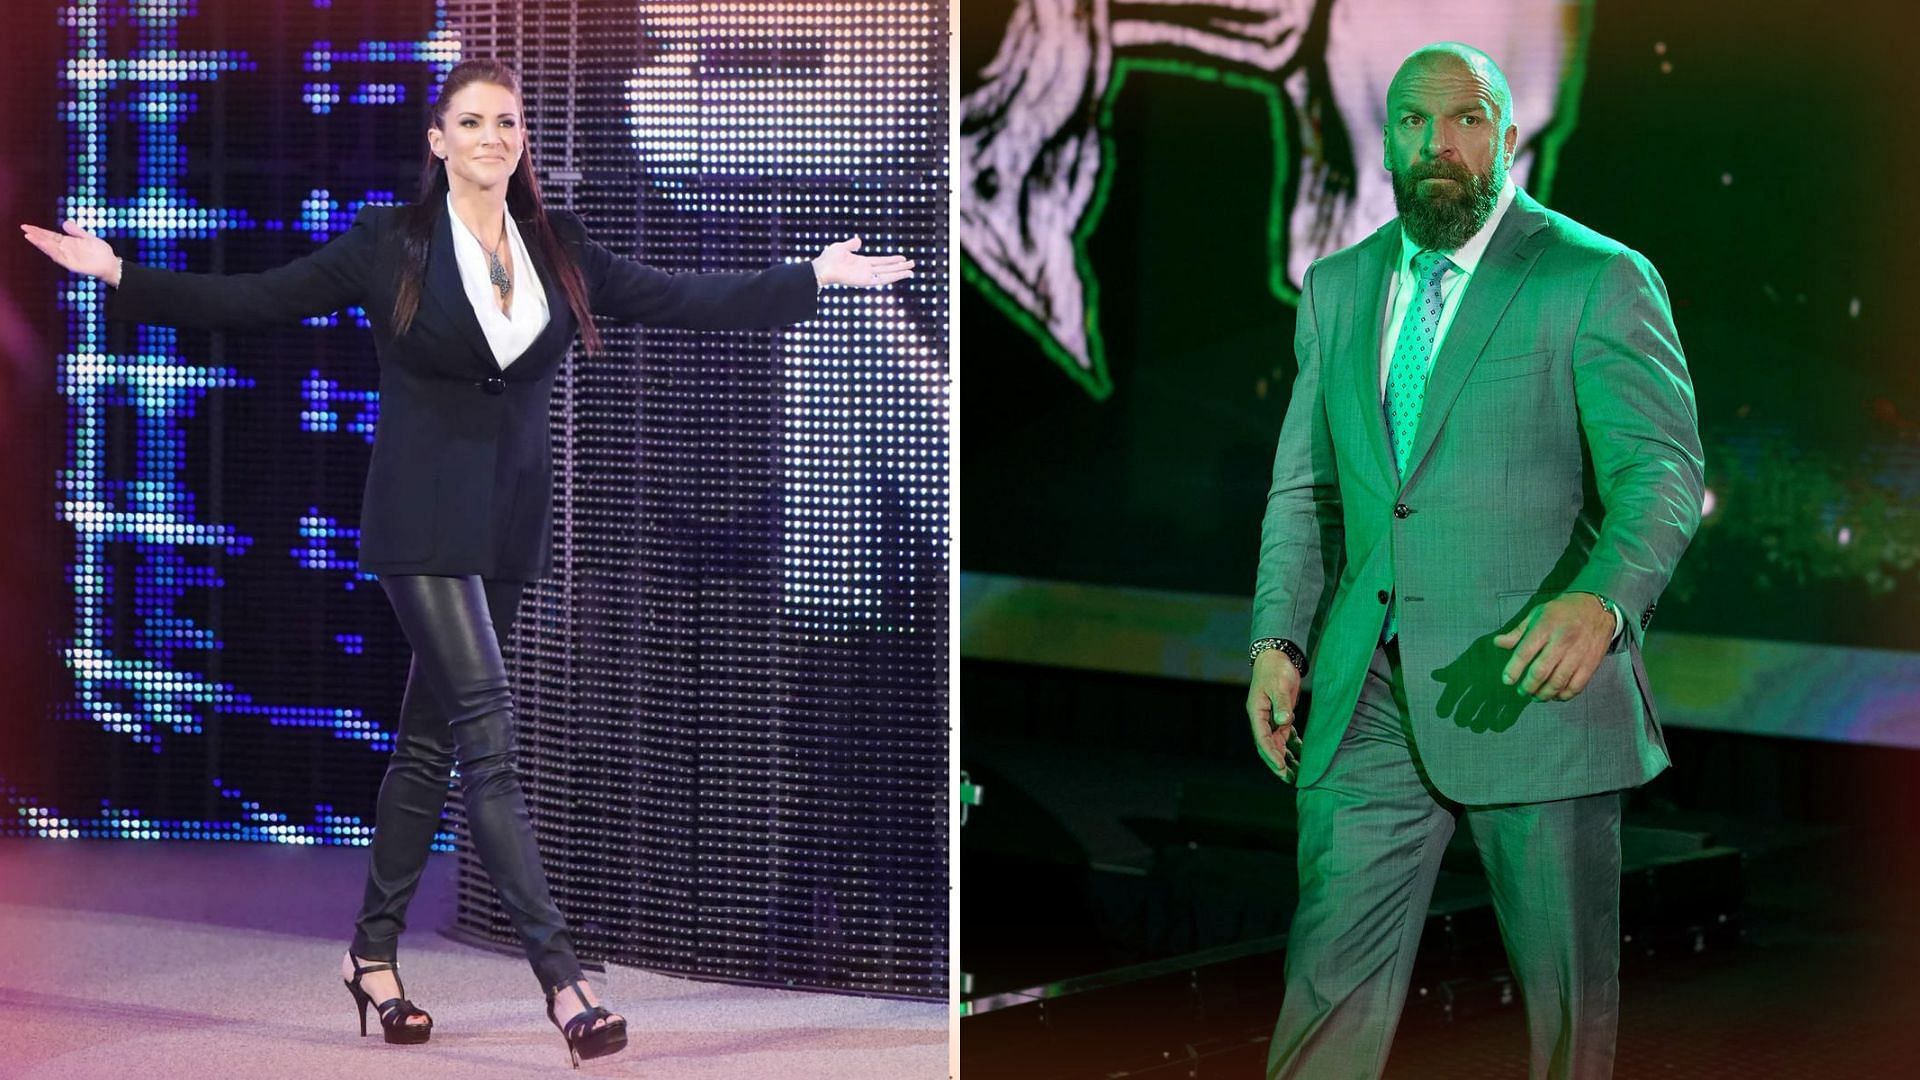 Stephanie McMahon and Triple H have been doing an immense job of running WWE after Vince McMahon stepped away